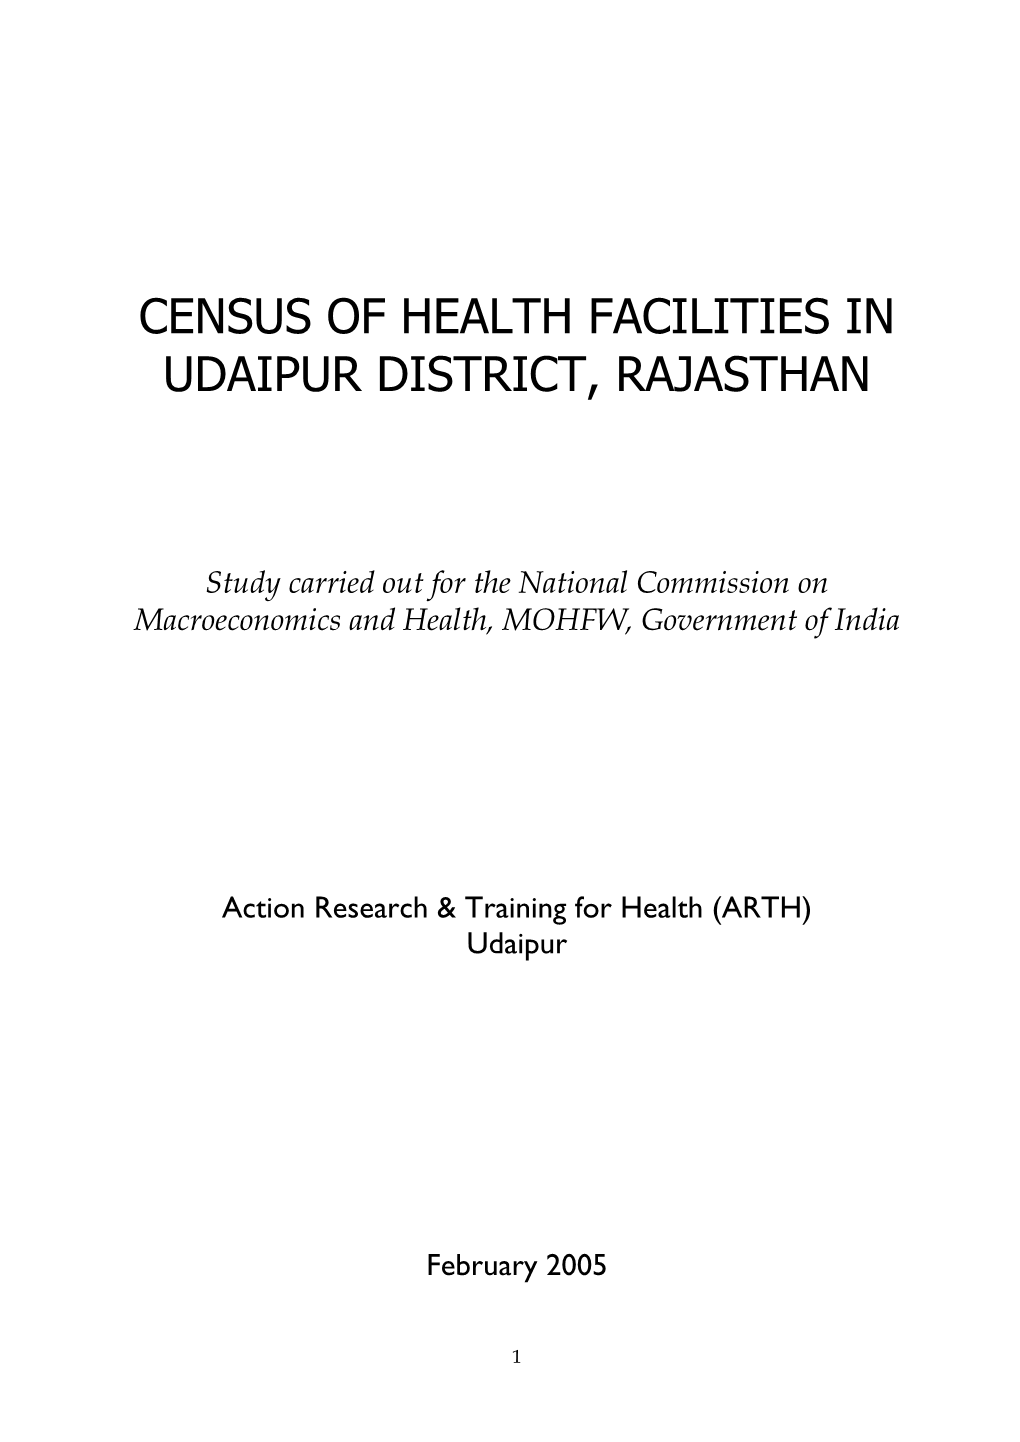 Census of Health Facilities in Udaipur District, Rajasthan